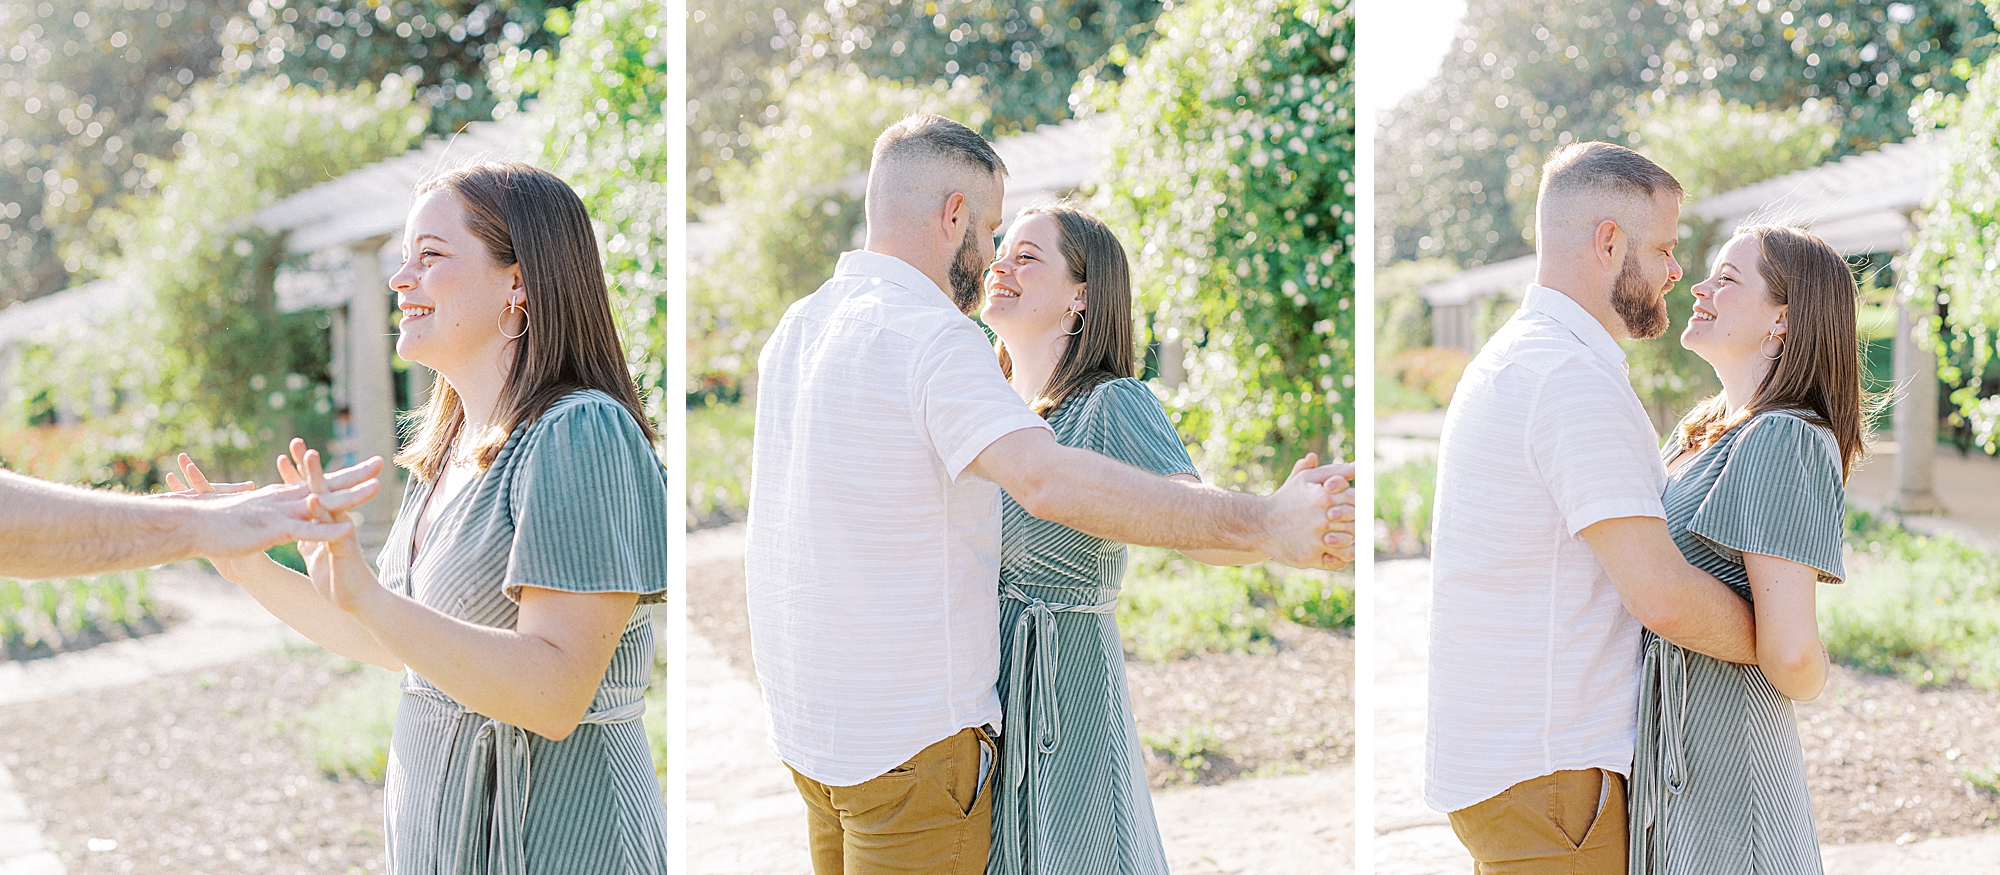 Woman wearing dusty blue dress for engagement photos with fiancé by Richmond wedding photographer.